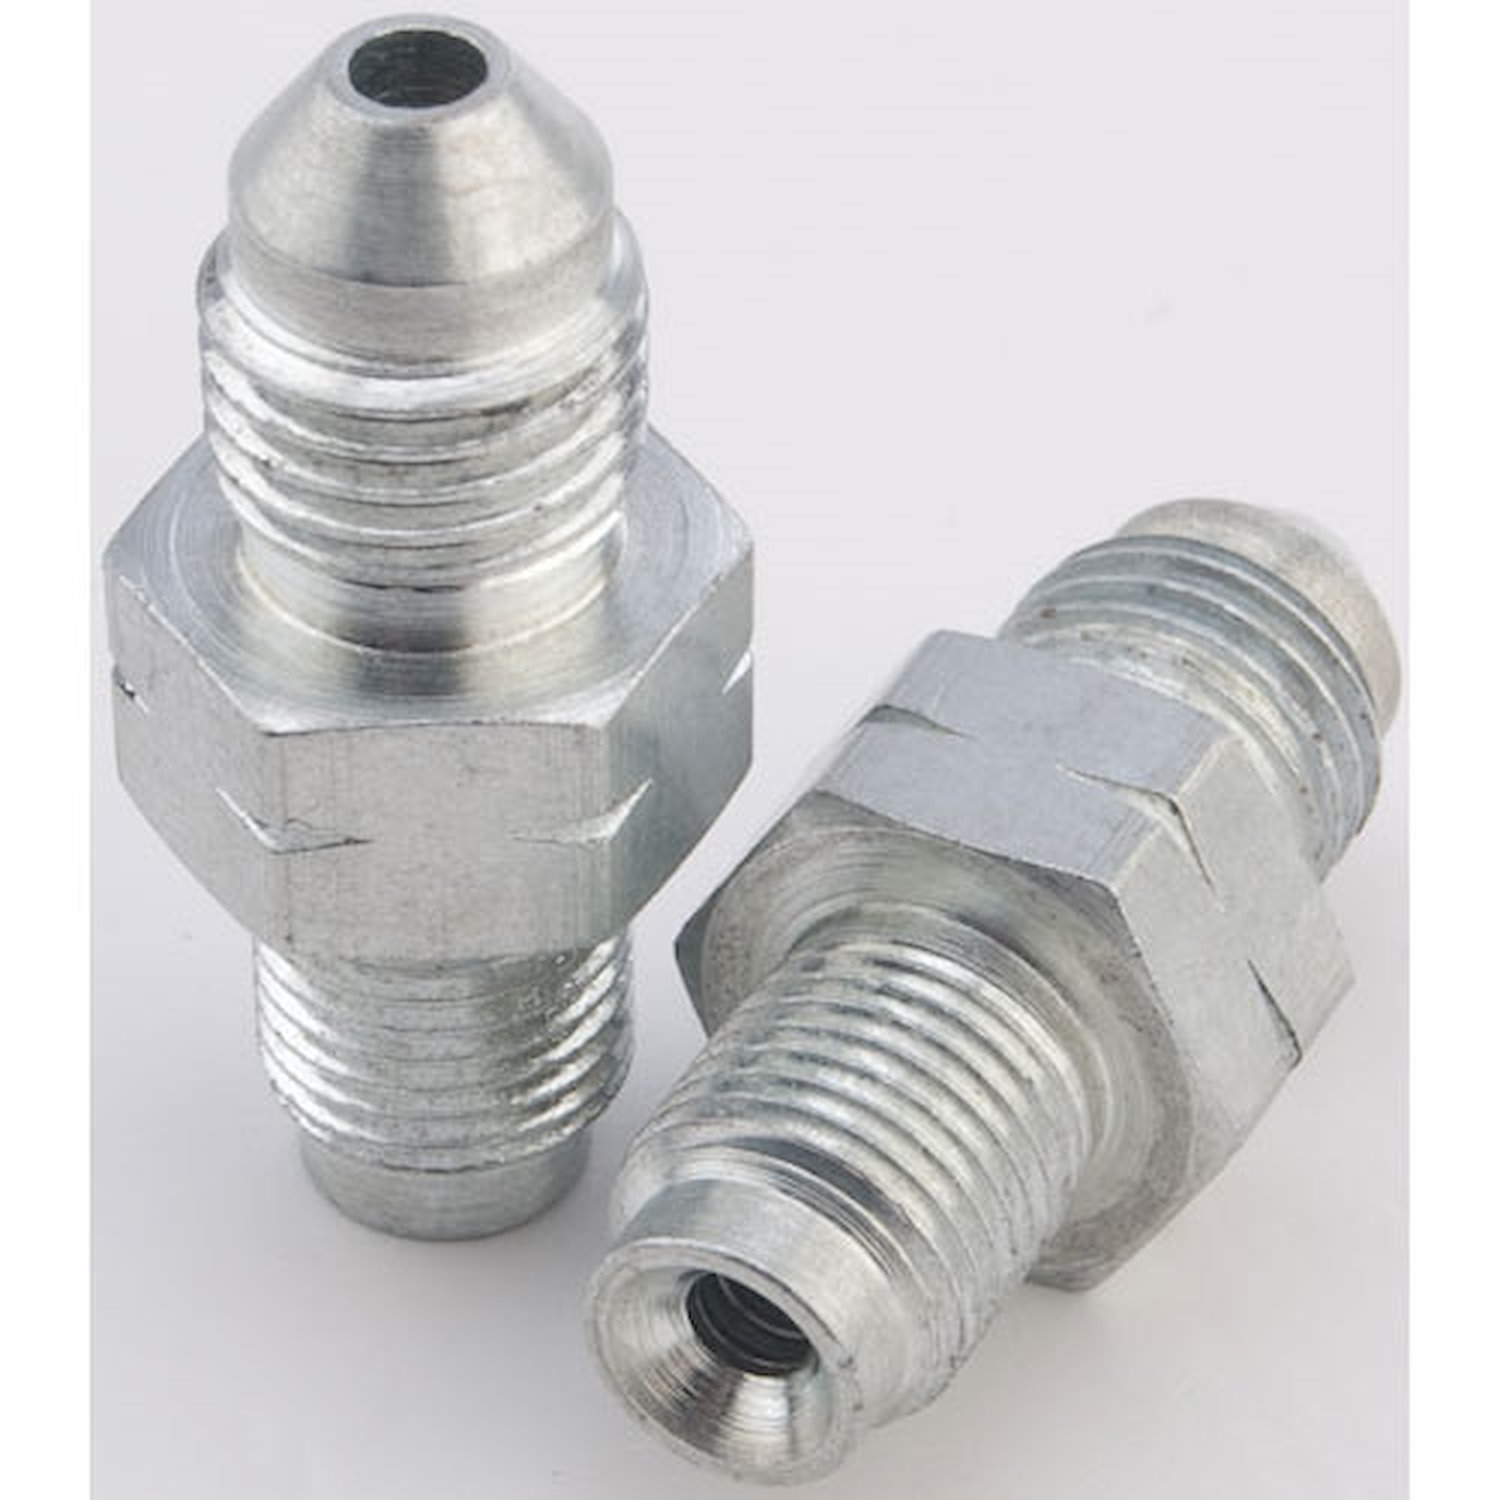 AN to Inverted Flare Male Brake Adapter Fittings [-4 AN Male to 10 mm x 1.0 Male Inverted Flare]